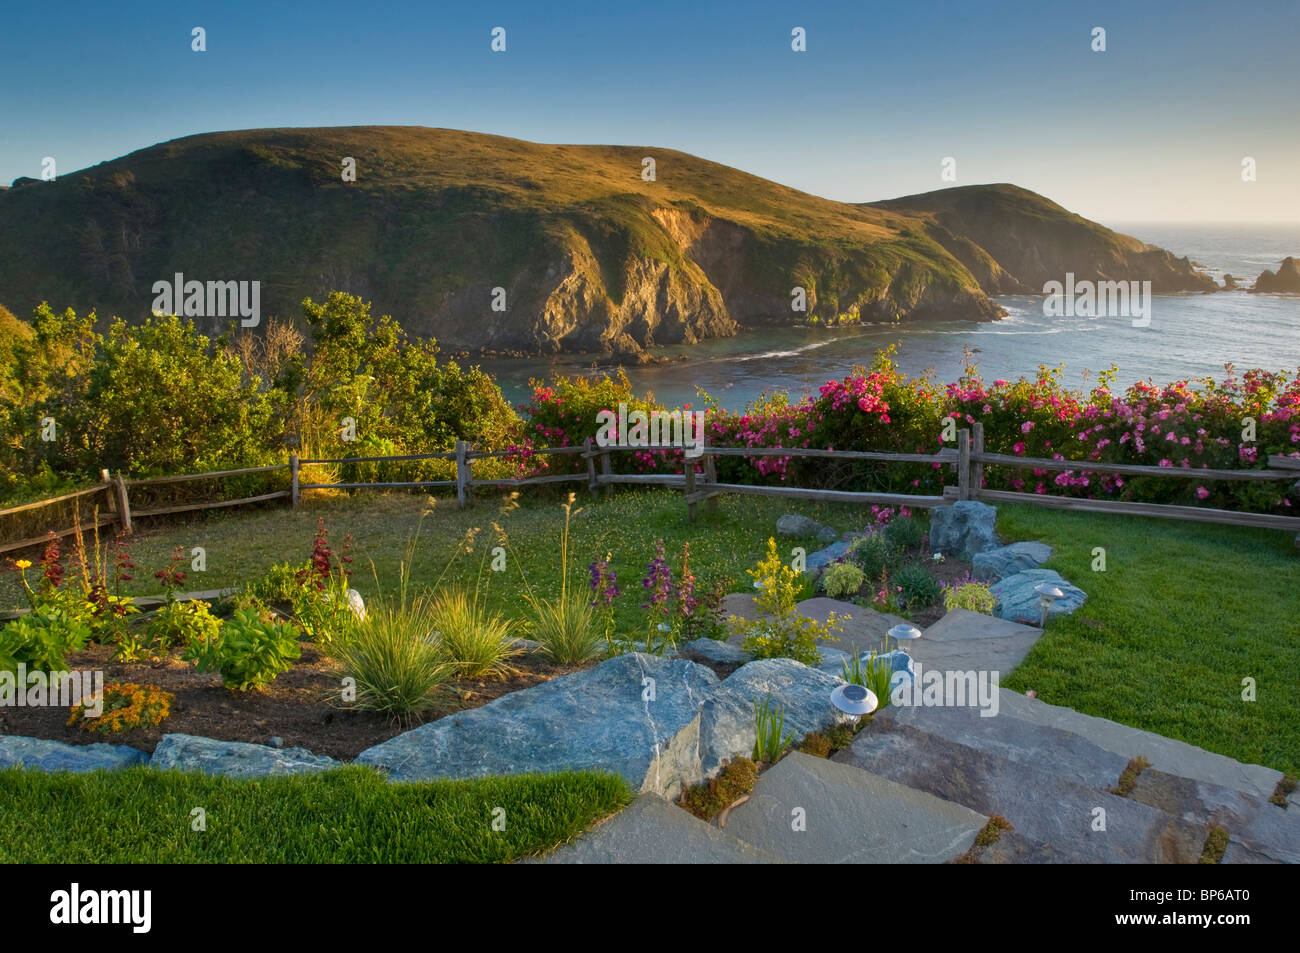 Lawn and garden over looking the ocean at sunset, Albion River Inn, Albion, Mendocino County, California Stock Photo